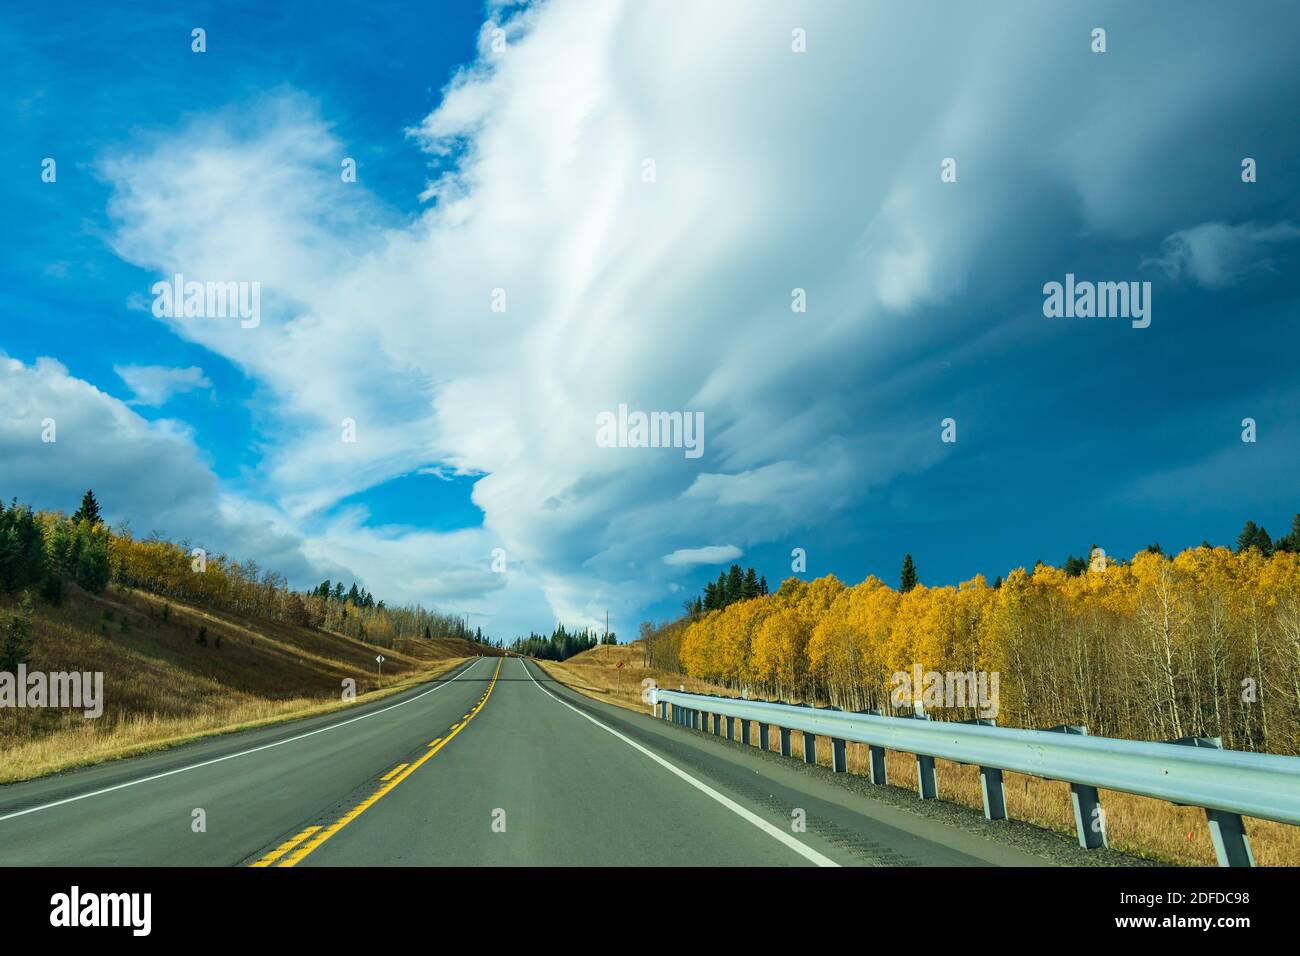 Country road, rural landscape in autumn season. Alberta Provincial Highway No. 22, also known as the Cowboy Trail. Alberta, Canada. Stock Photo